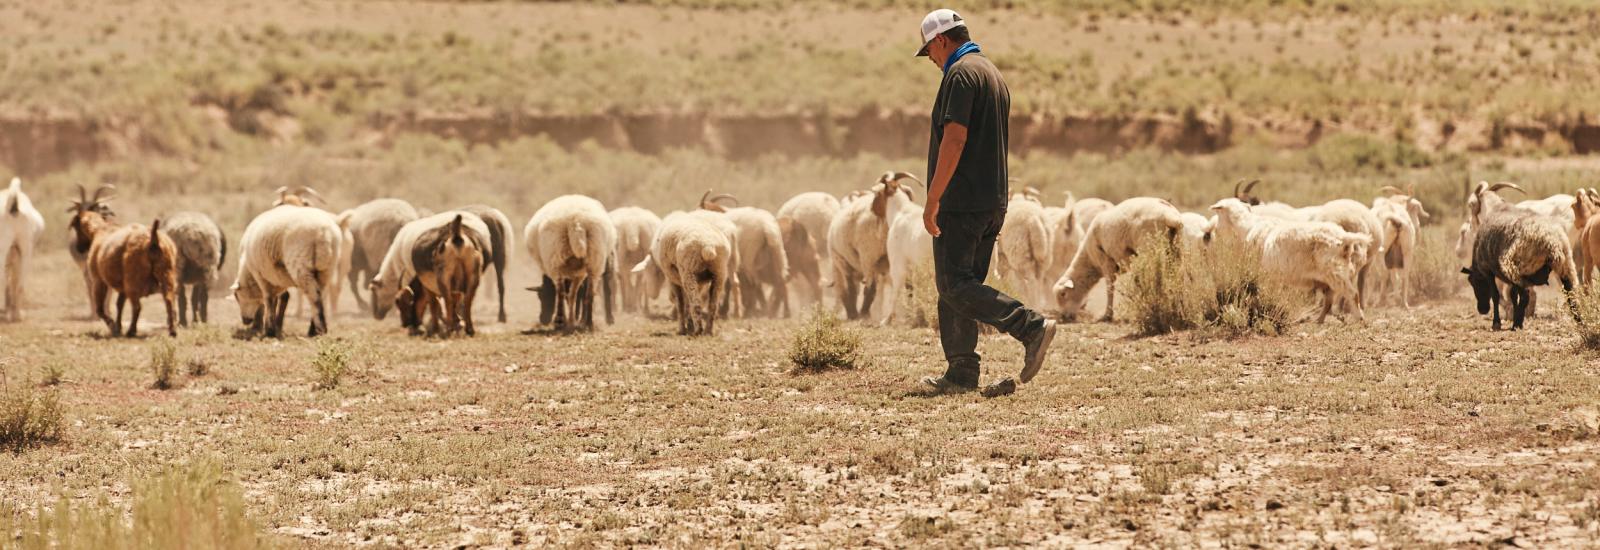 Man herding sheep and goats in a dirt field with sparse vegetation moving parallel to a dirt hill with trees ahead.